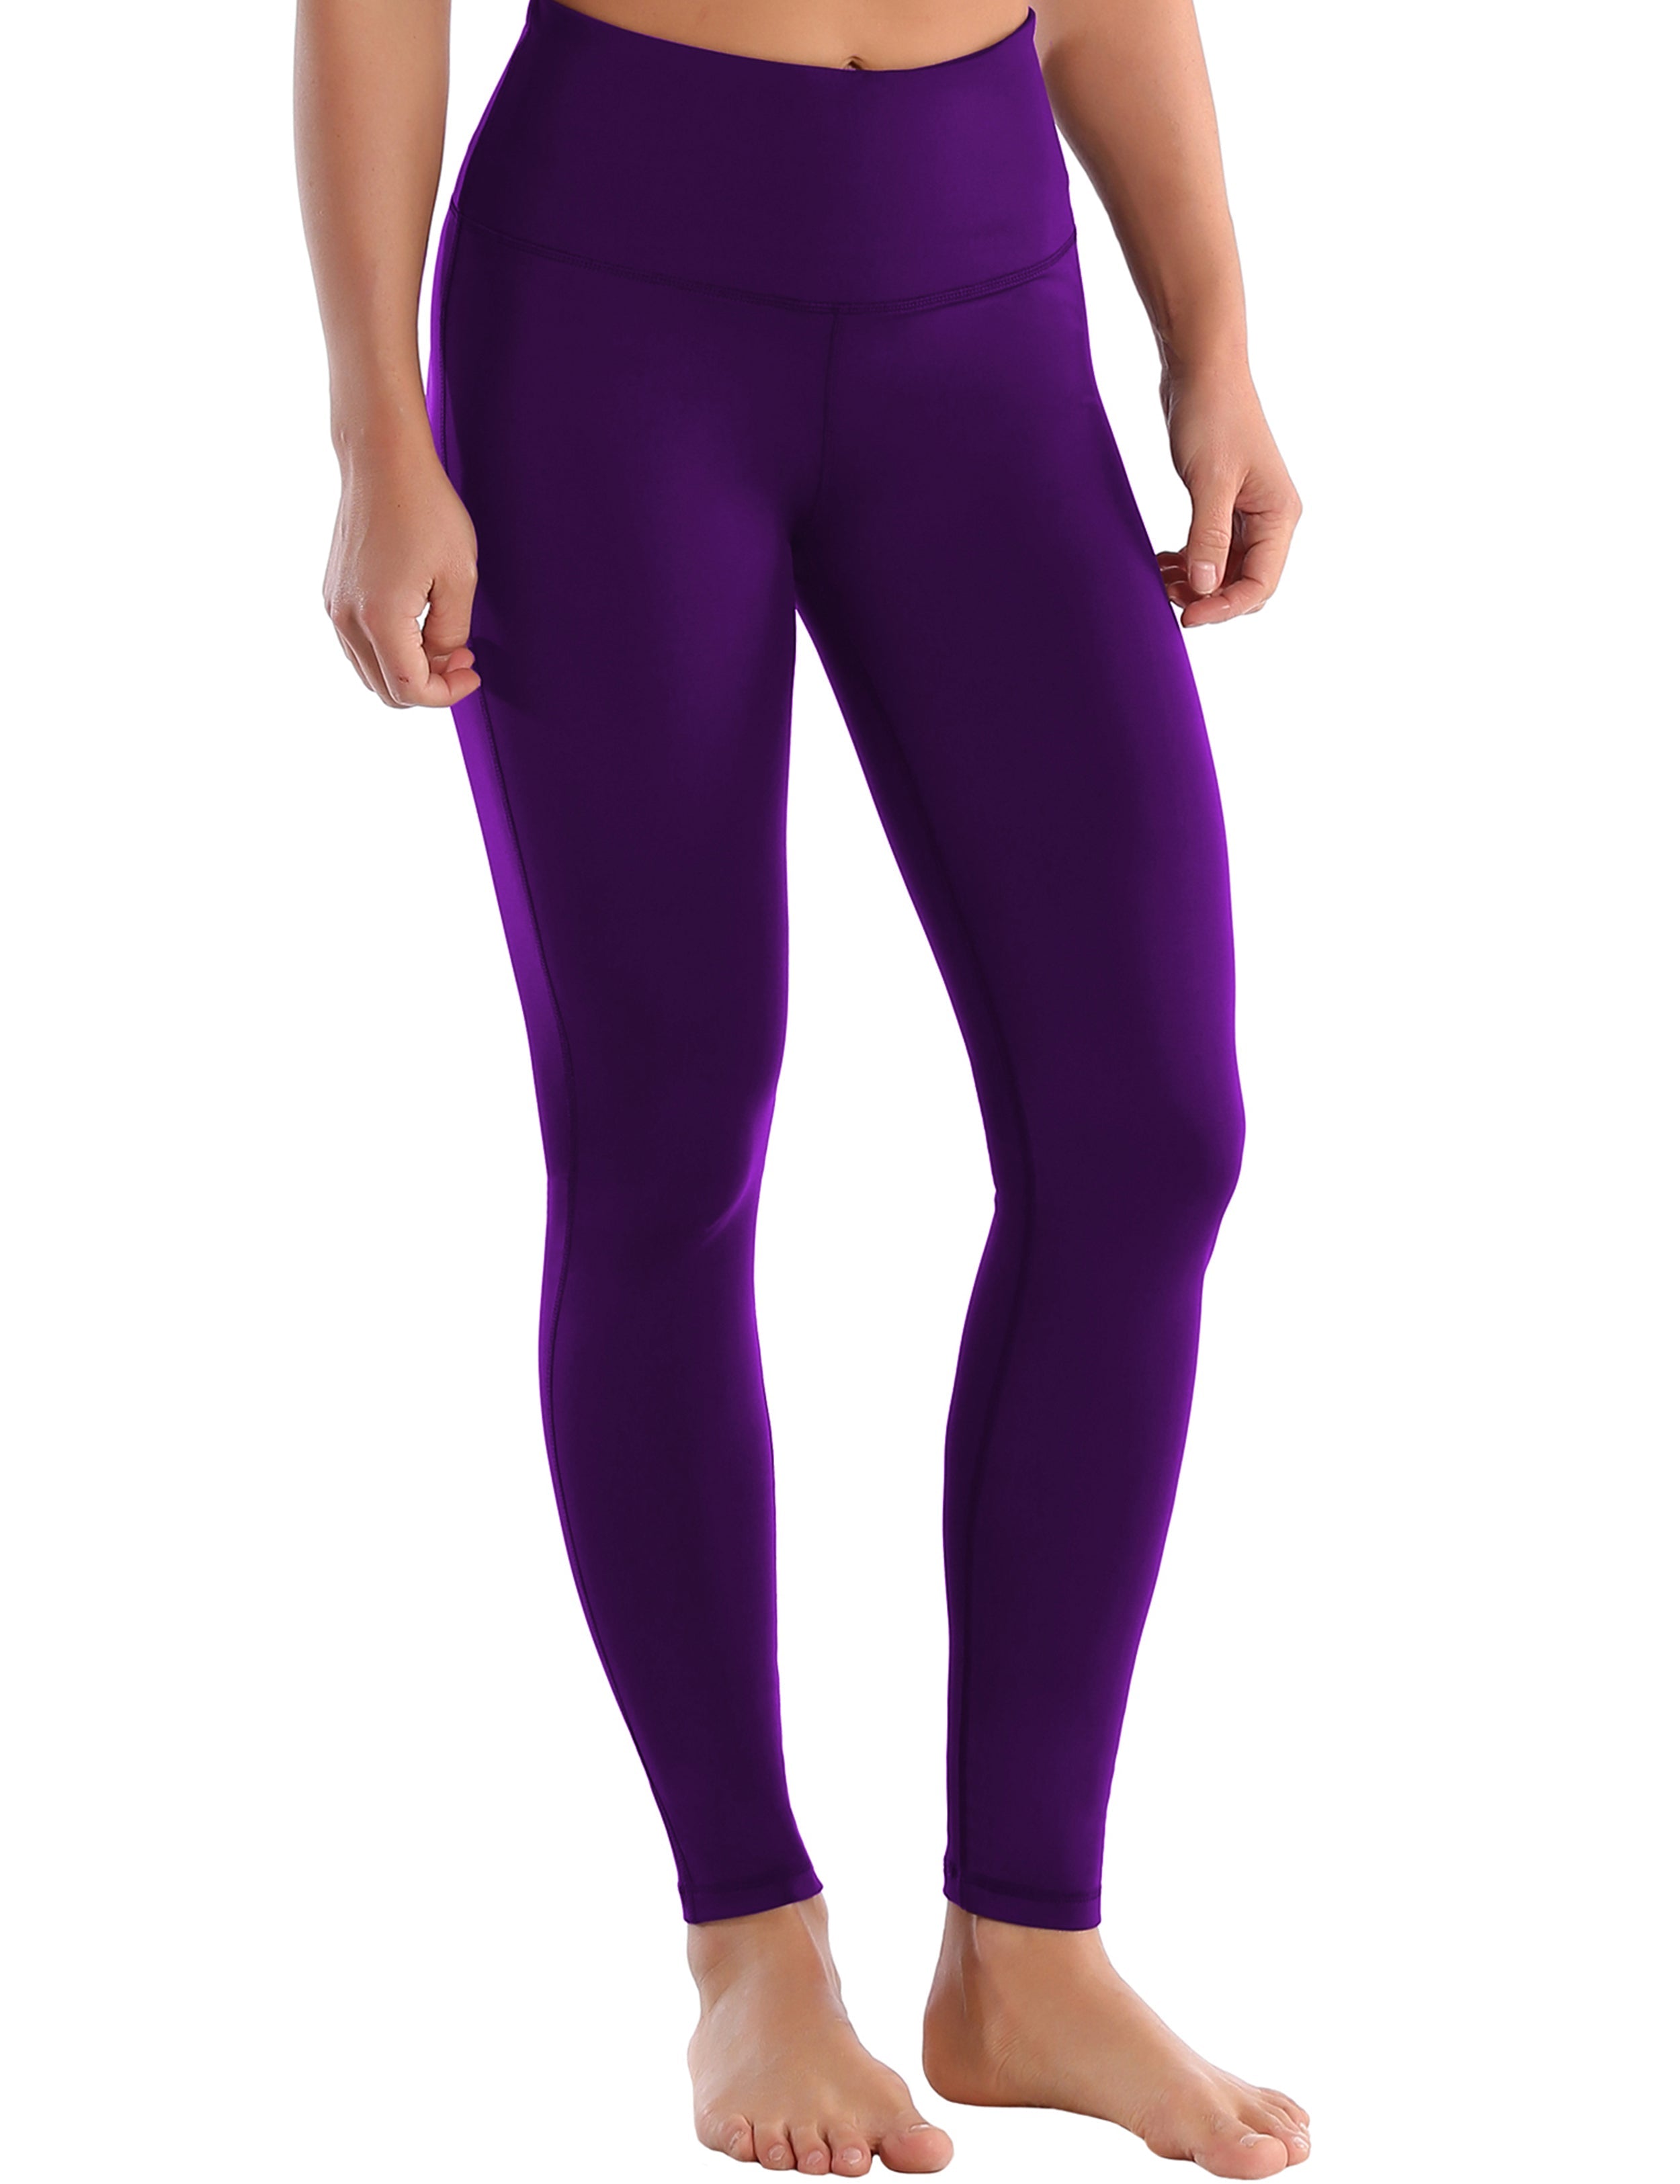 High Waist Side Line Biking Pants eggplantpurple Side Line is Make Your Legs Look Longer and Thinner 75%Nylon/25%Spandex Fabric doesn't attract lint easily 4-way stretch No see-through Moisture-wicking Tummy control Inner pocket Two lengths